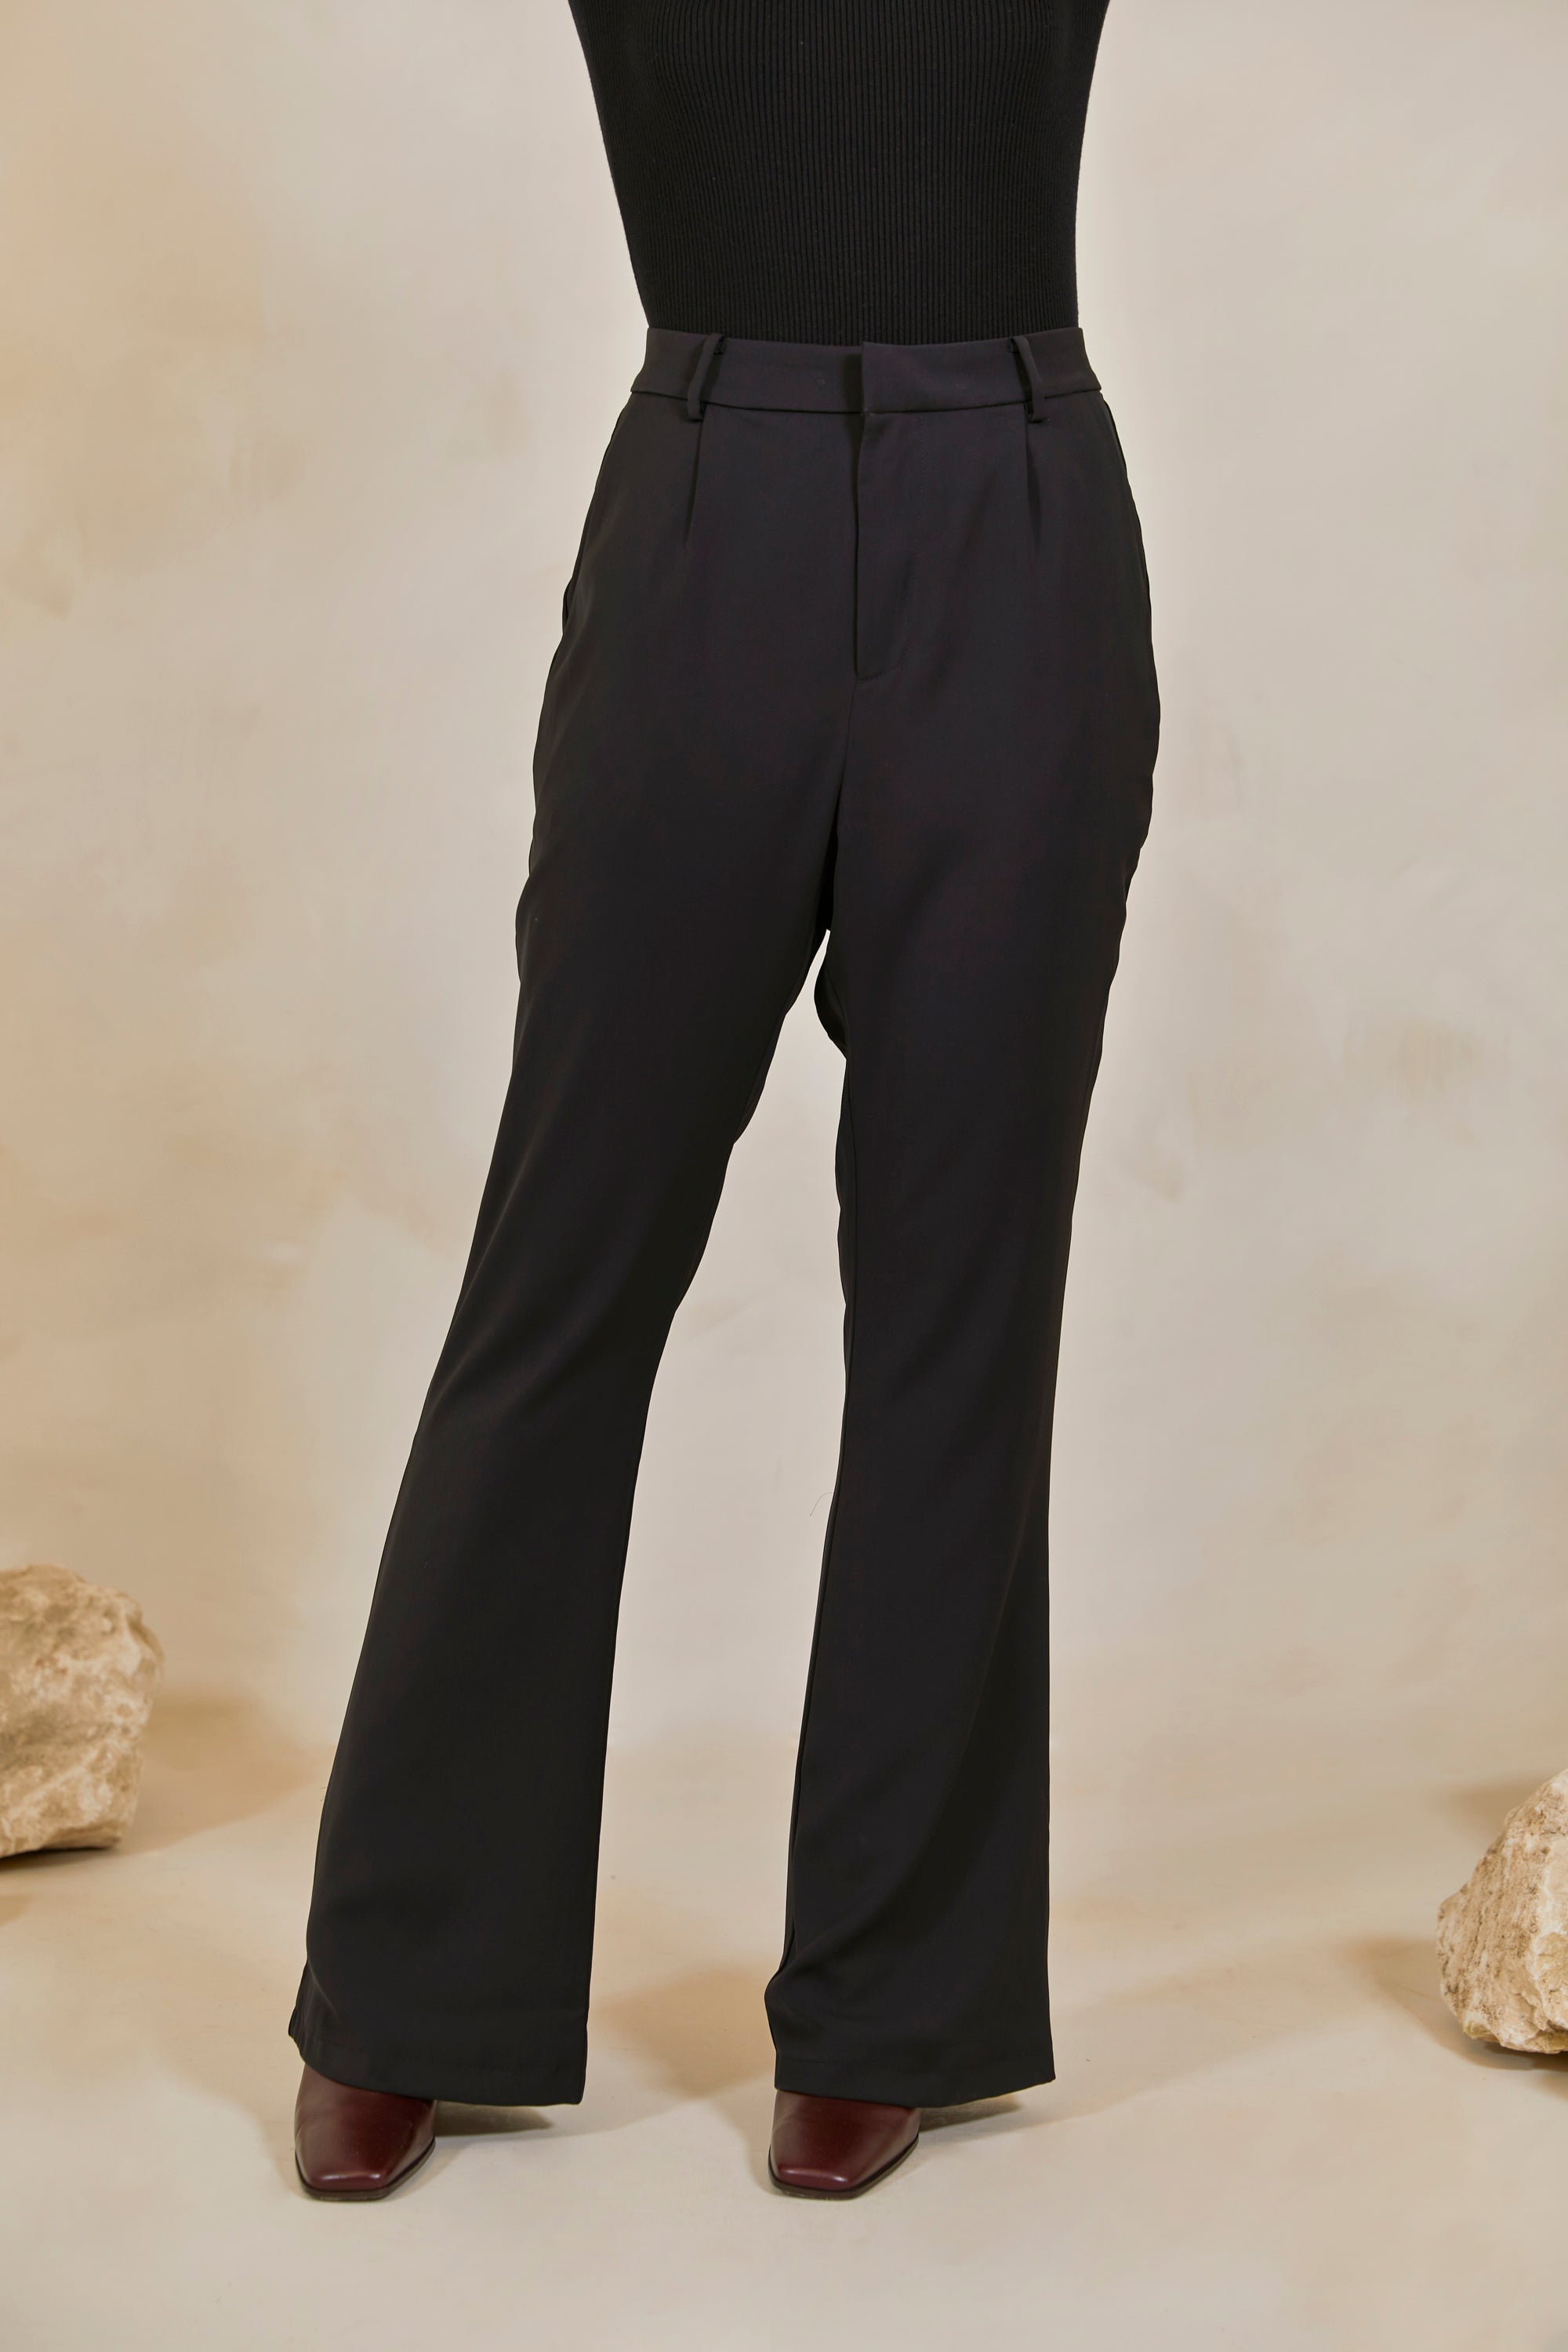 Timani Slim Leg Trousers - Black Veiled Collection 